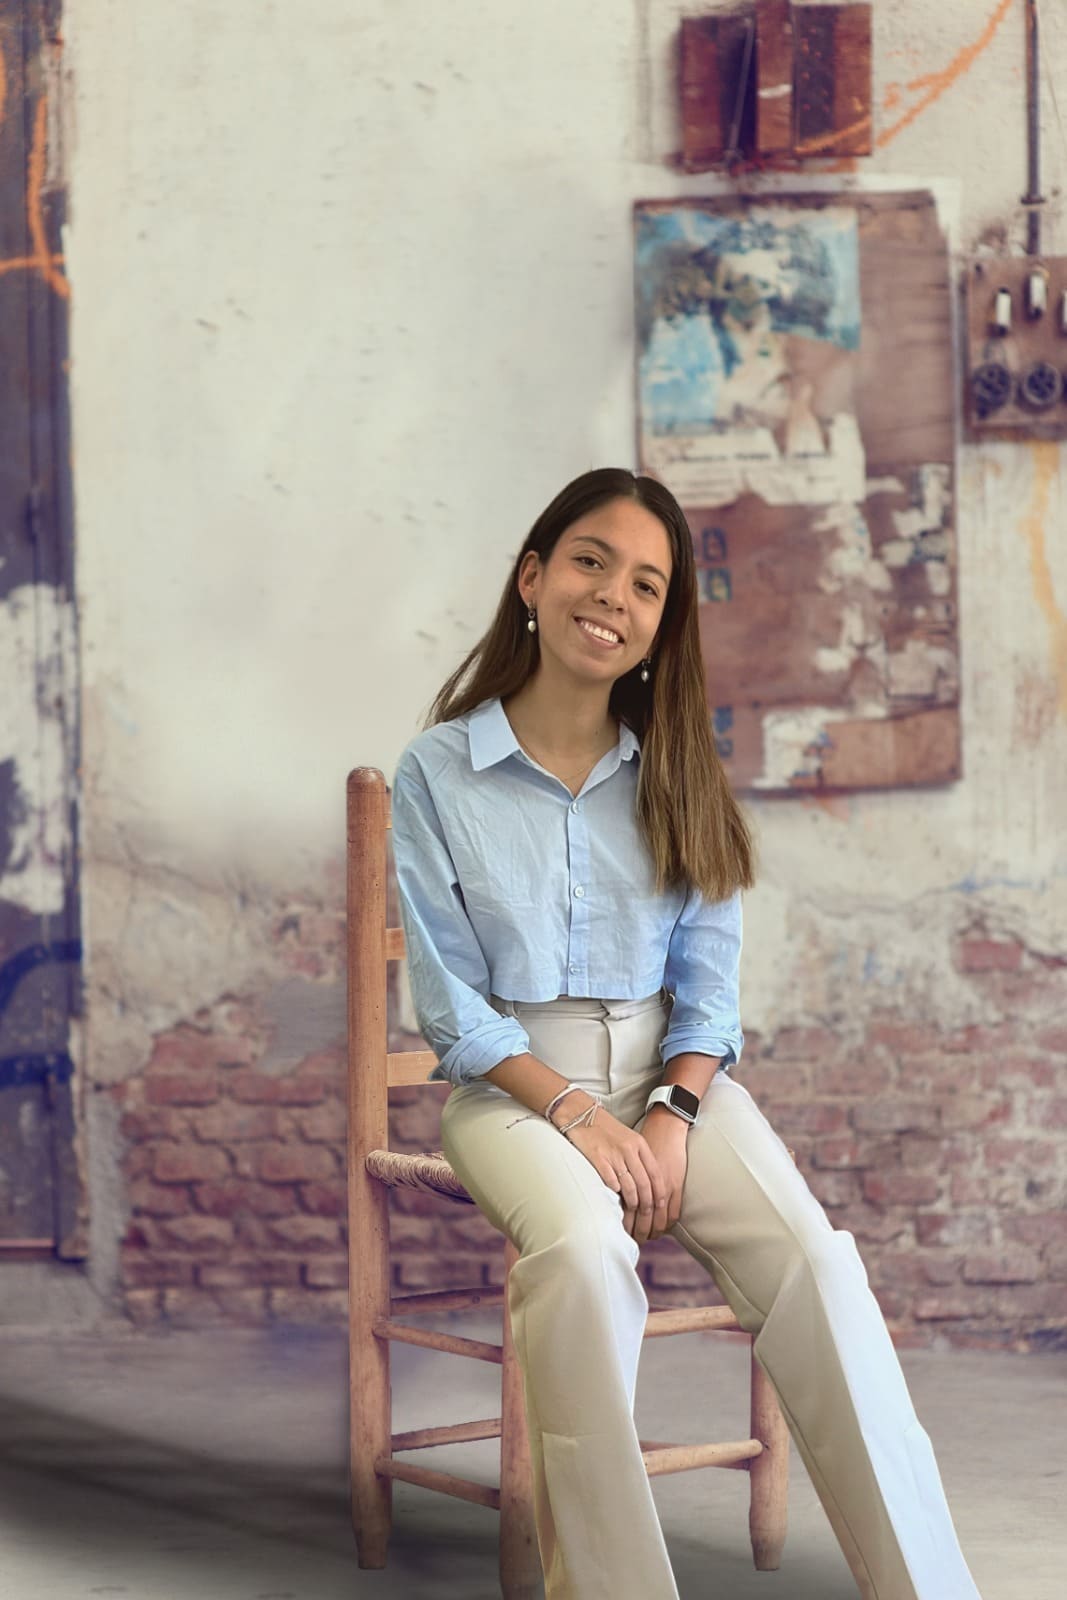 Flavia Del Aguila Kanso Coliving Marketing Assistant